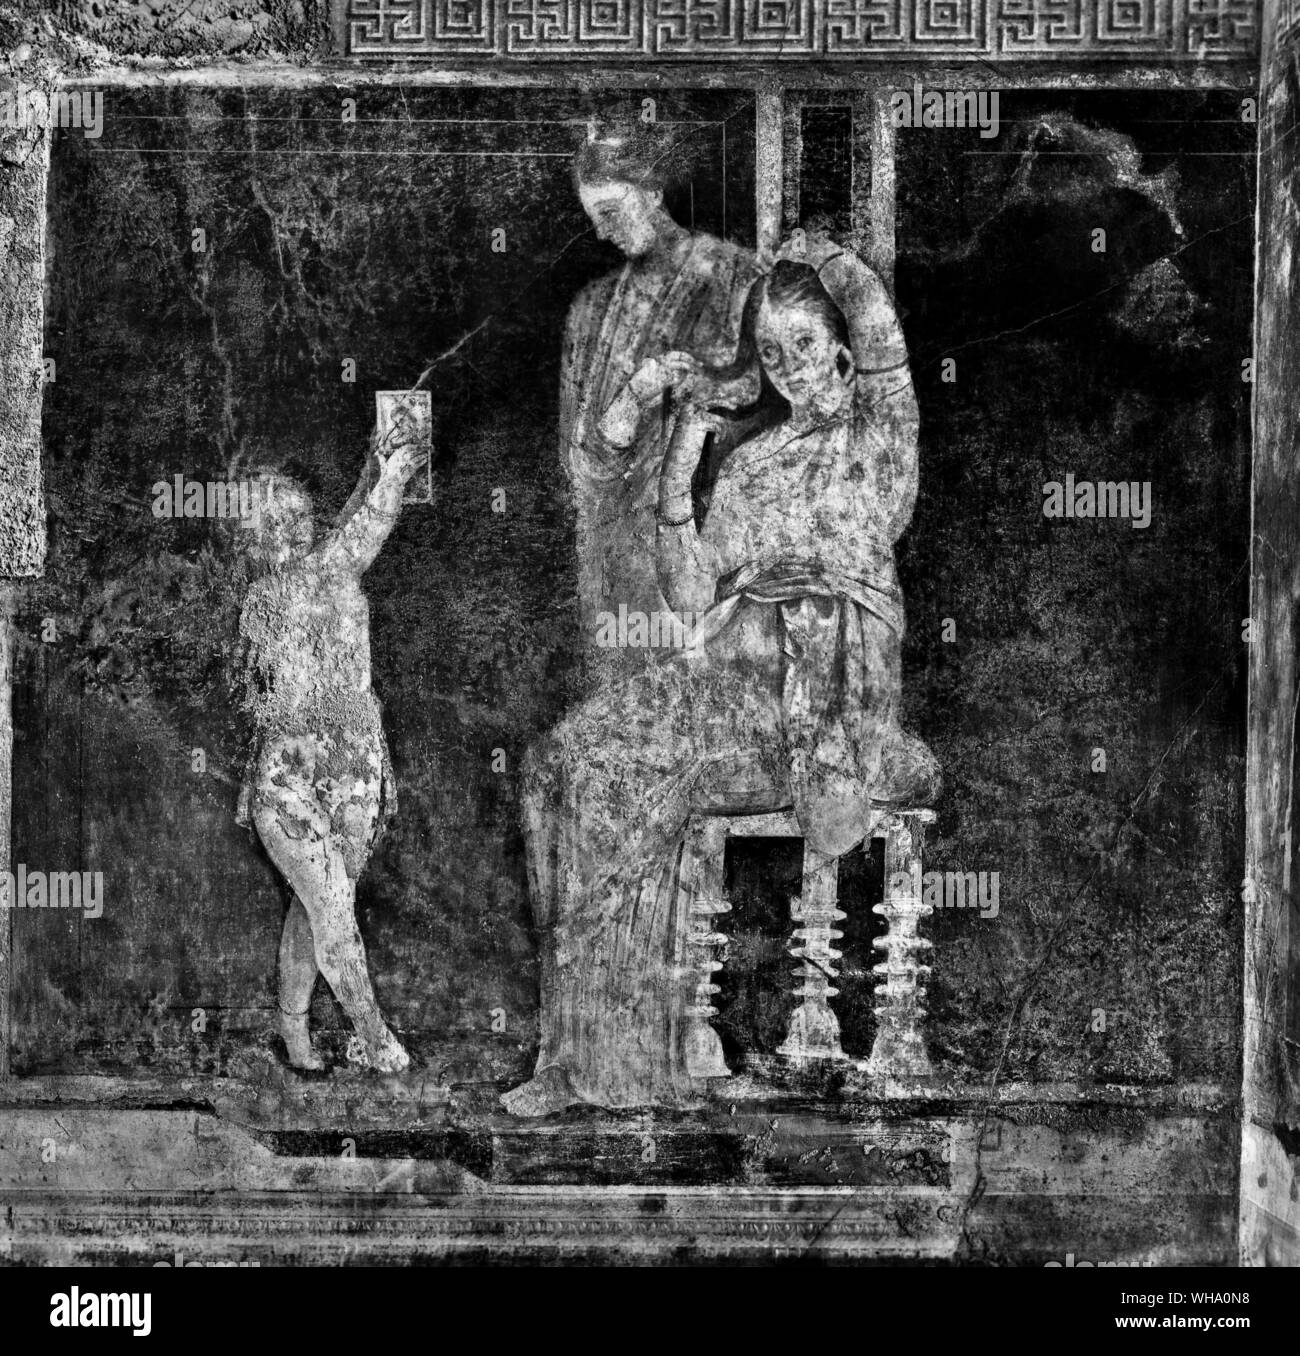 Initiates into the Dionysian mysteries. A fresco from the Villa dei Misteri at Pompeii ('Love and her servant''Love and her servant'). Stock Photo